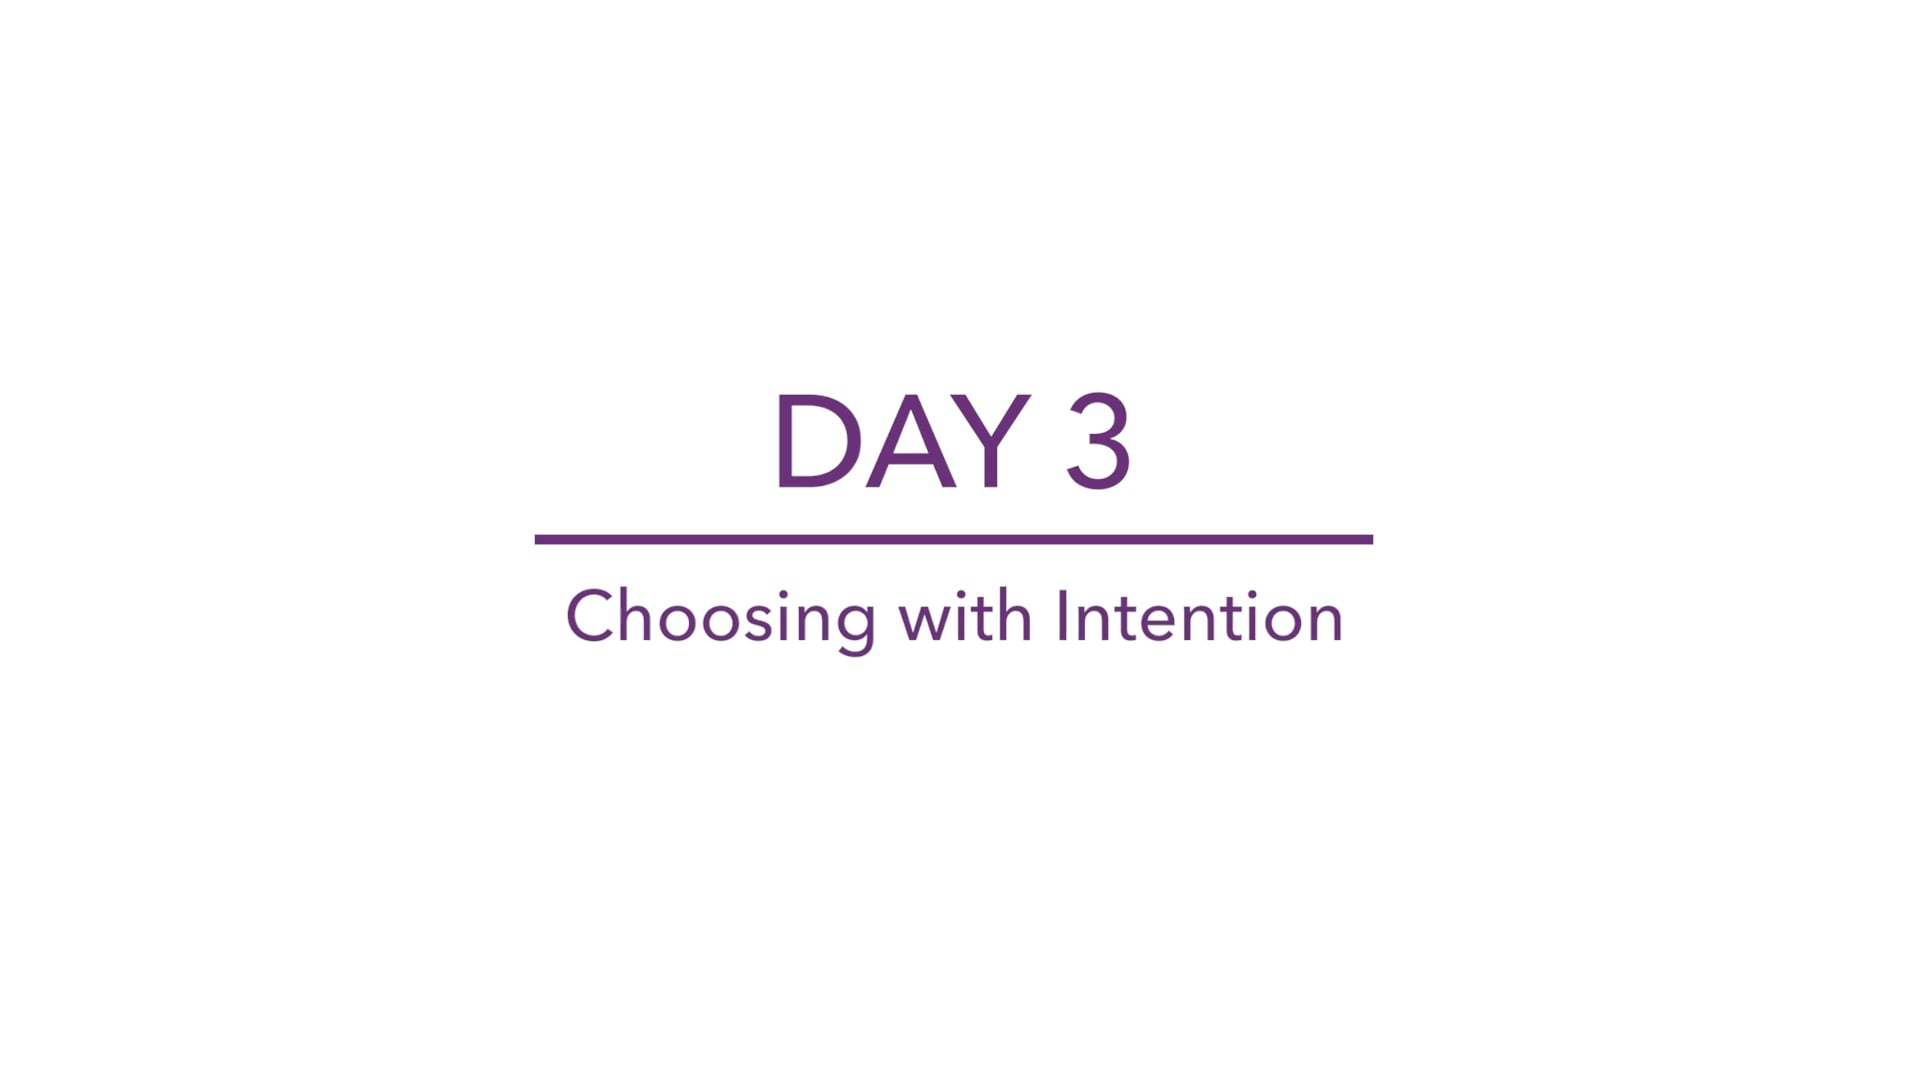 Day 3: Choosing with Intention